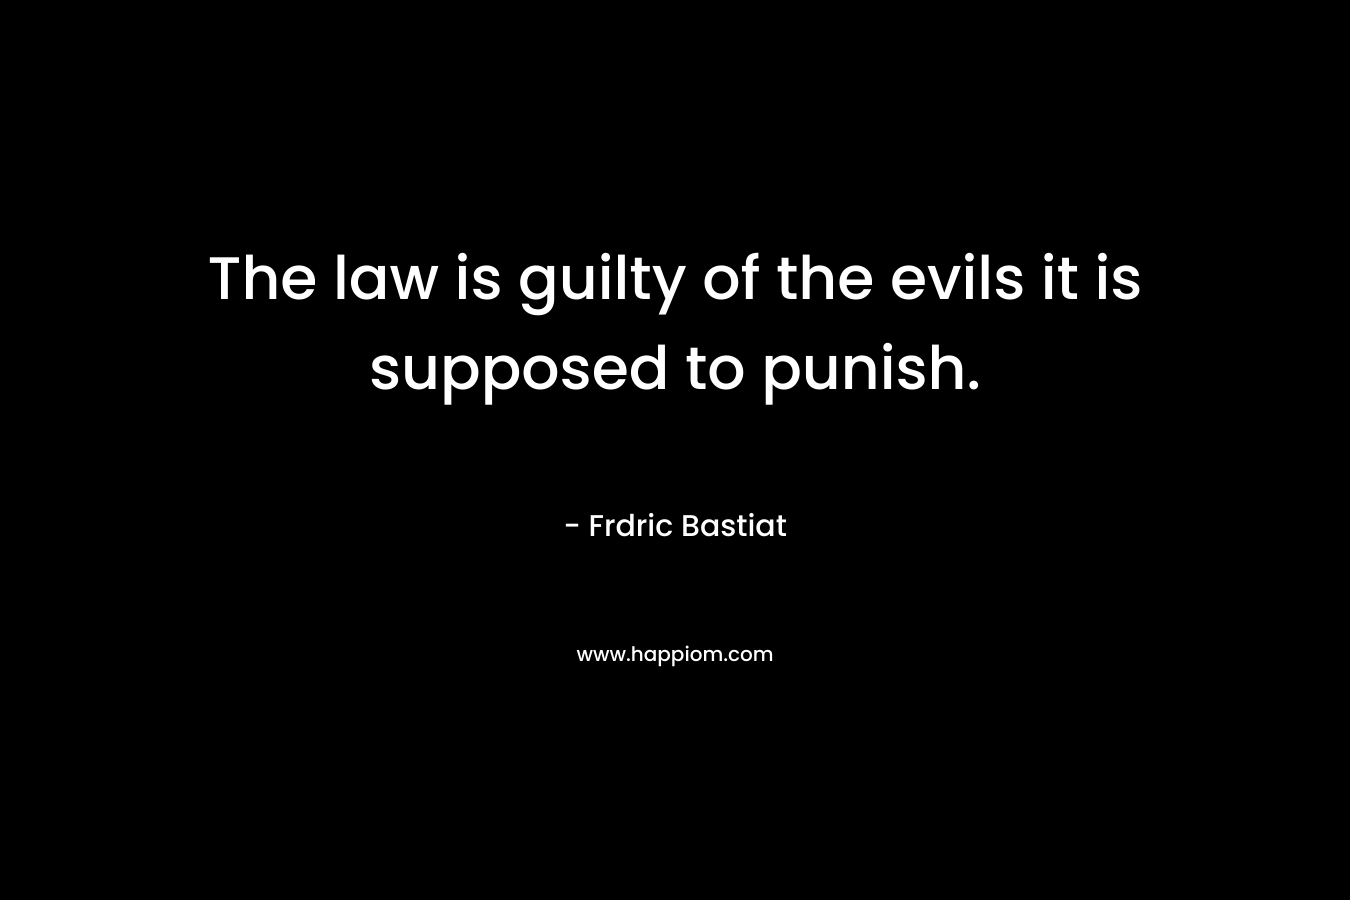 The law is guilty of the evils it is supposed to punish.